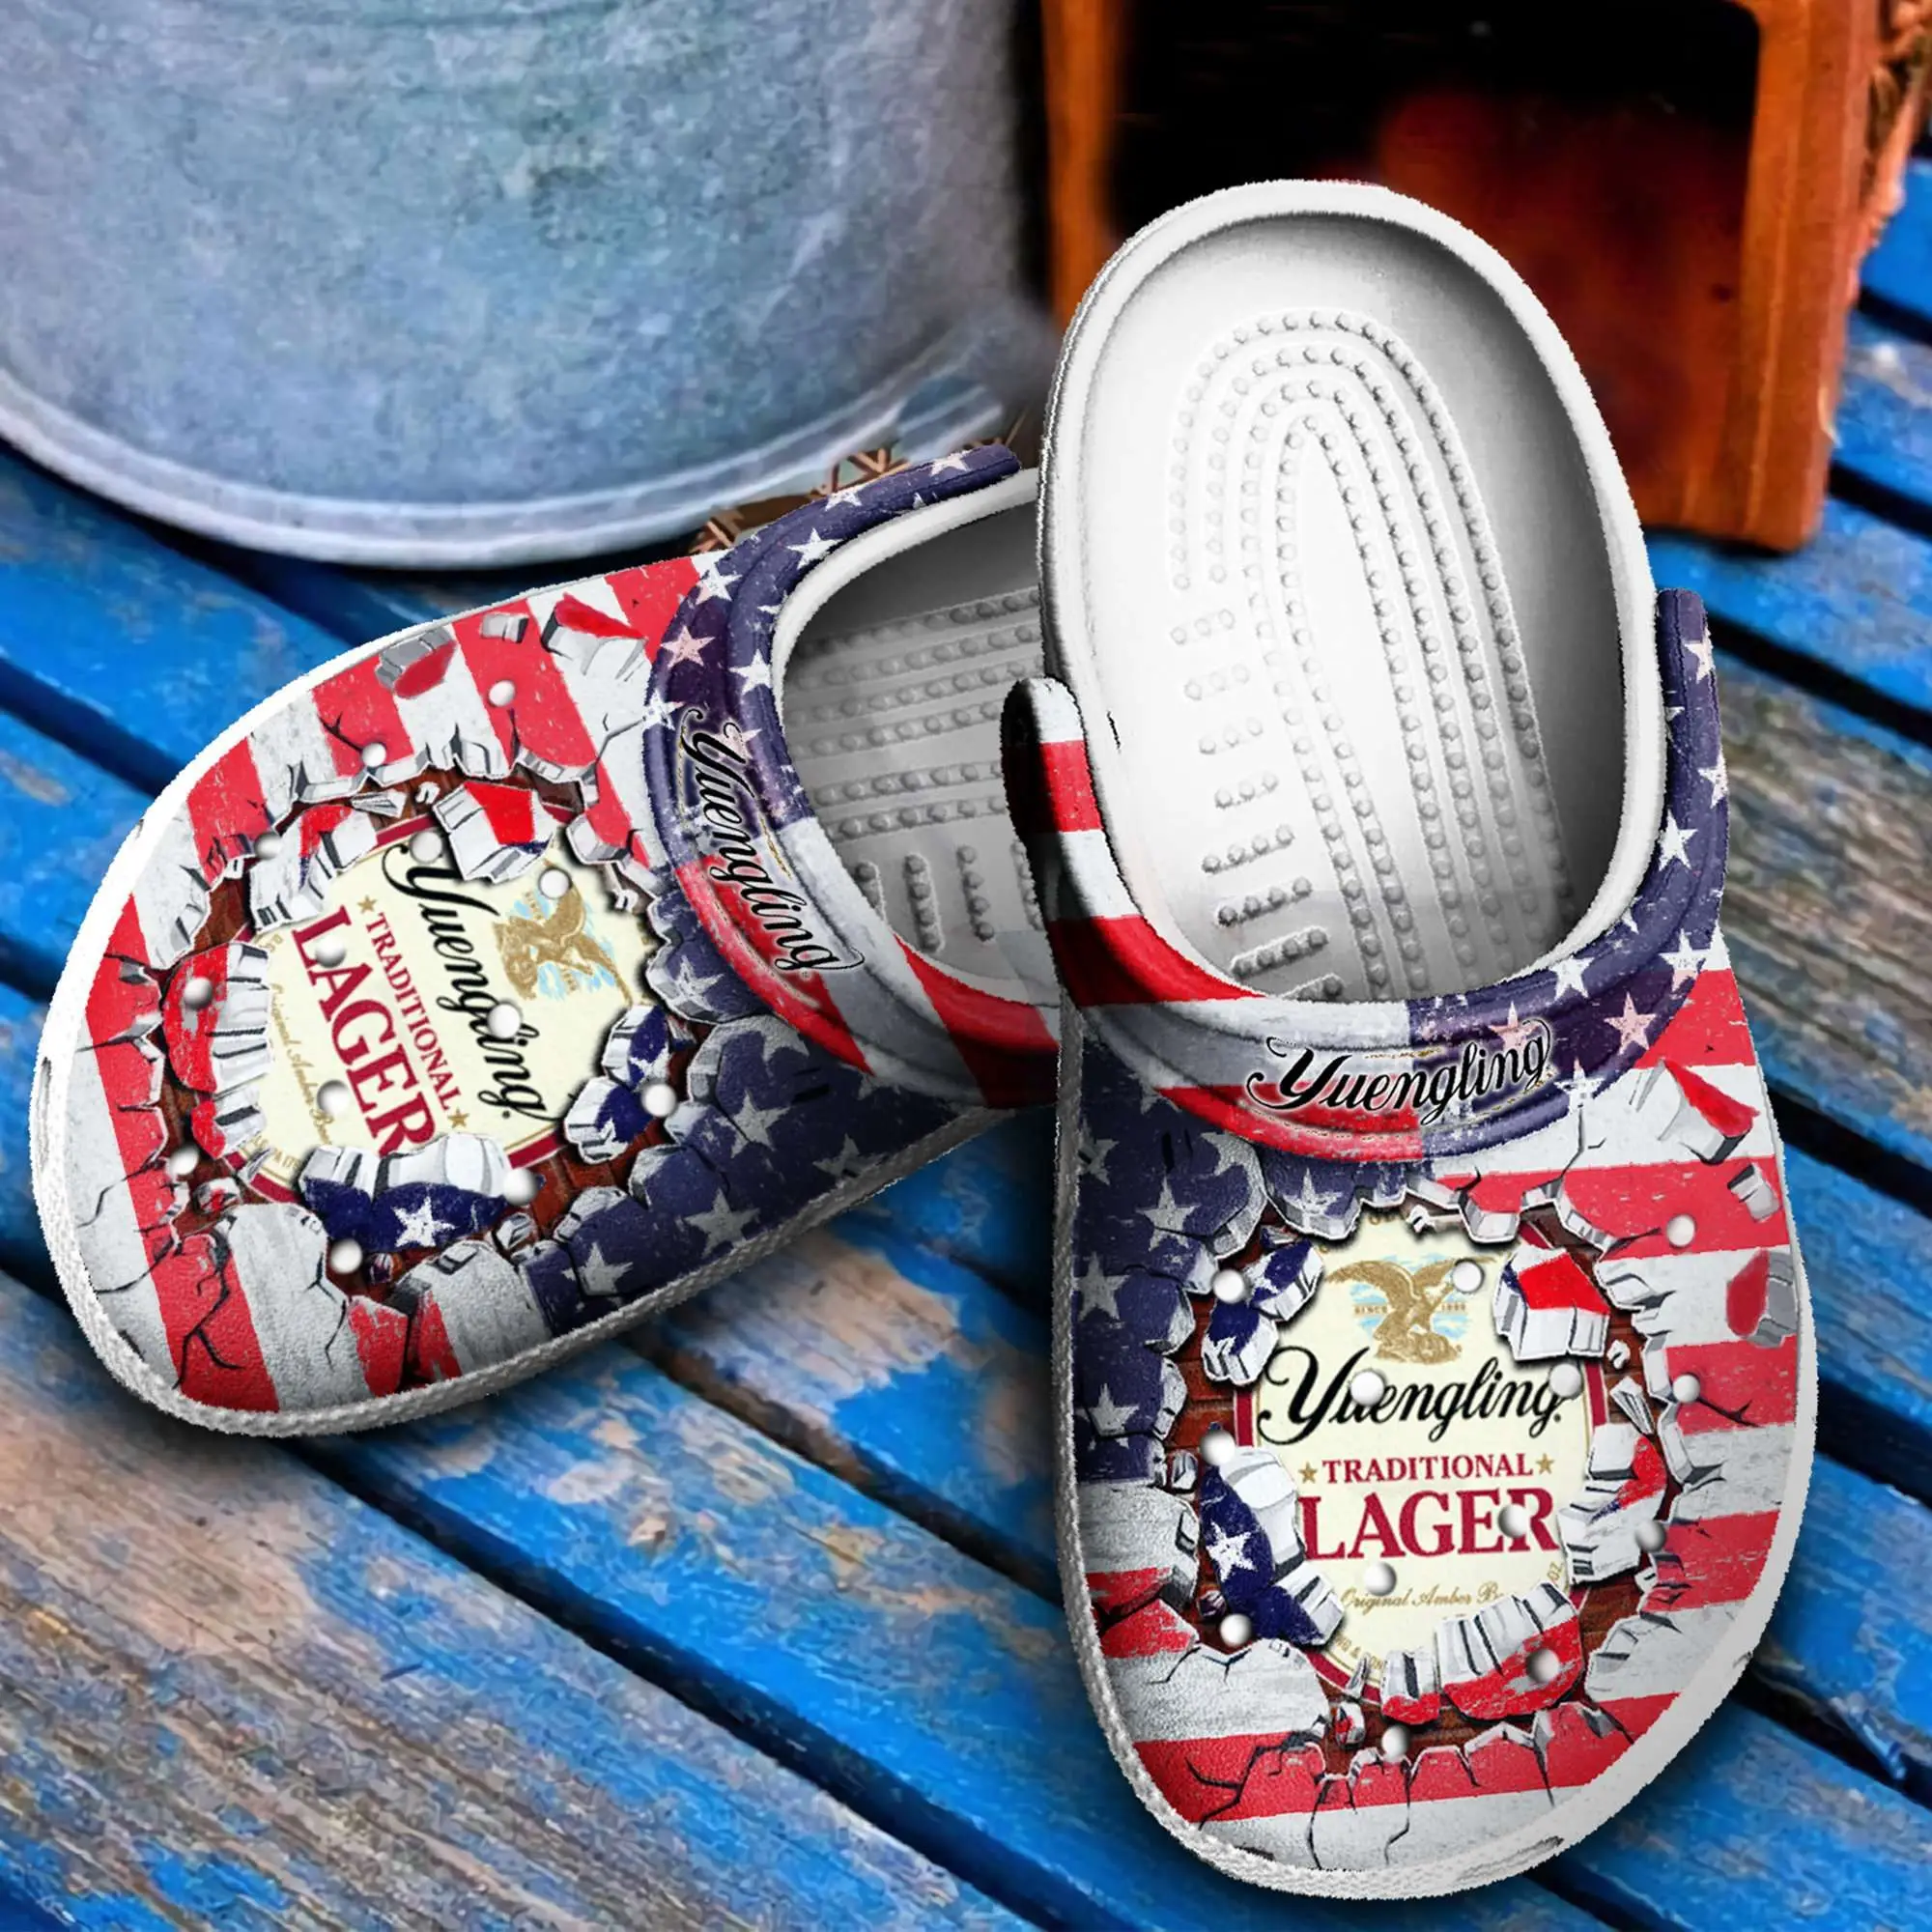 

ELVISWORDS Casual Sandals for Men Women Clogs Slippers US Flag with Lager Pattern Summer Flats Outdoor Breathable Flip Flops Hot